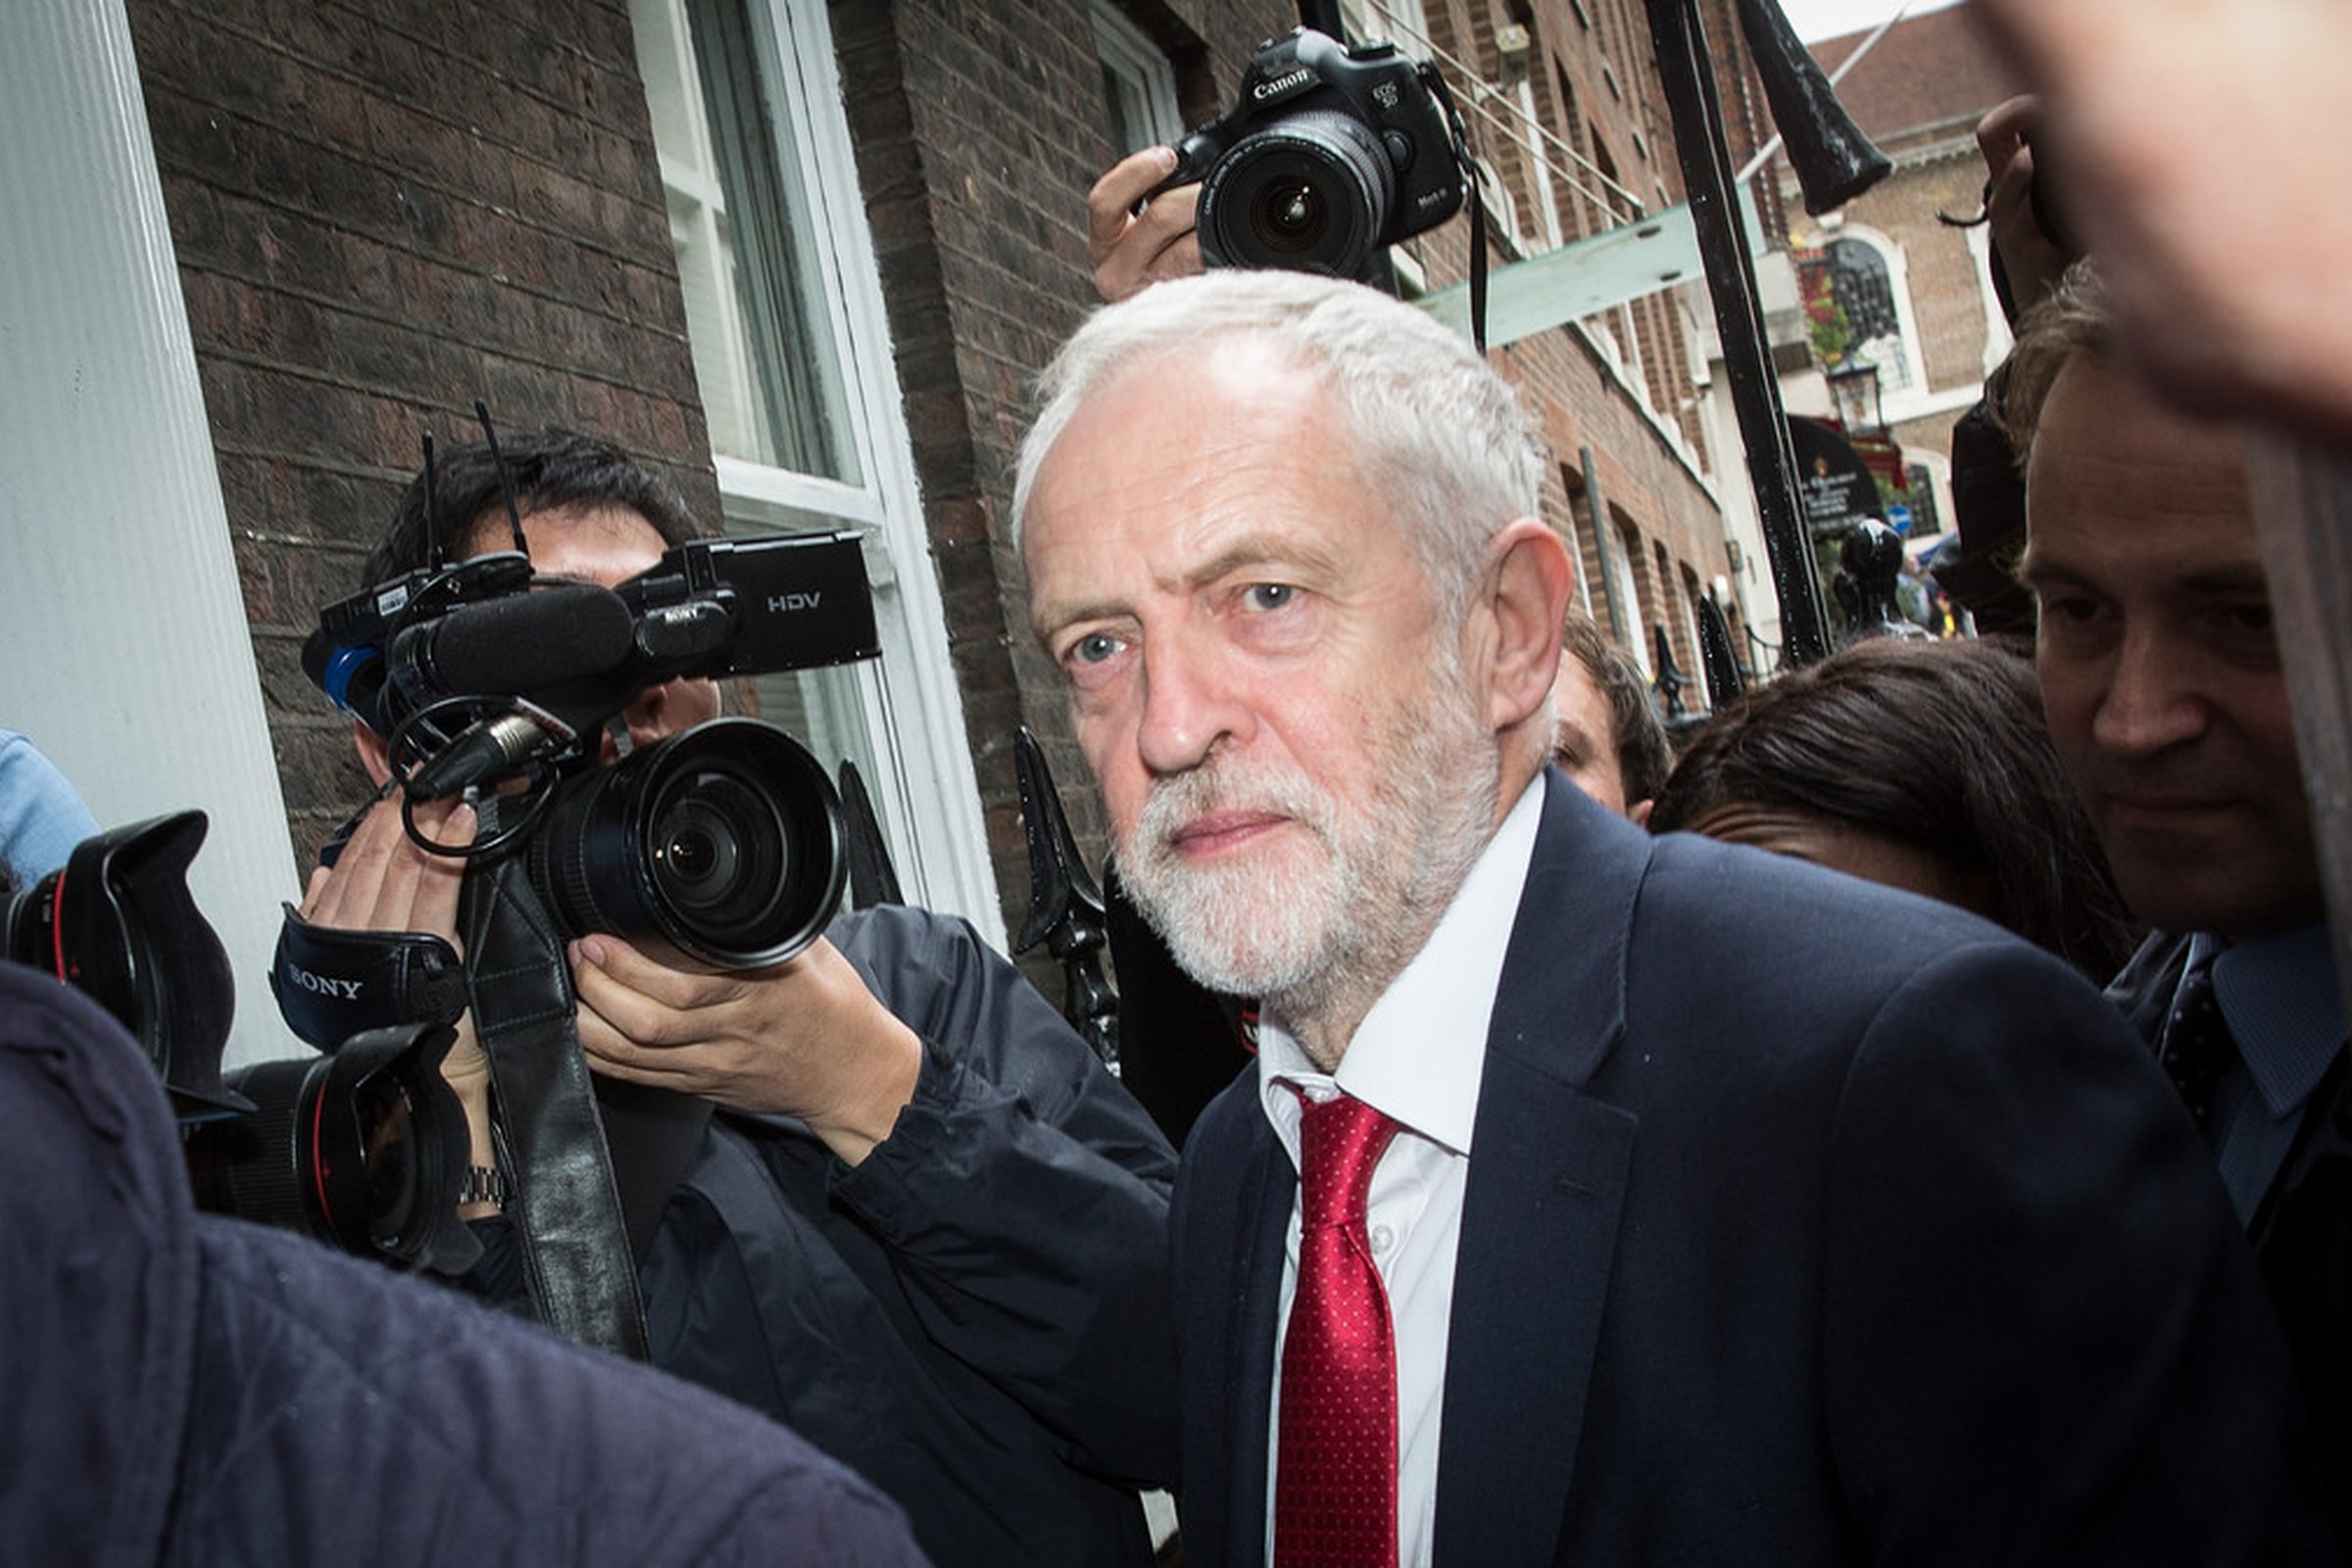 Does Labour have an antisemitism problem?